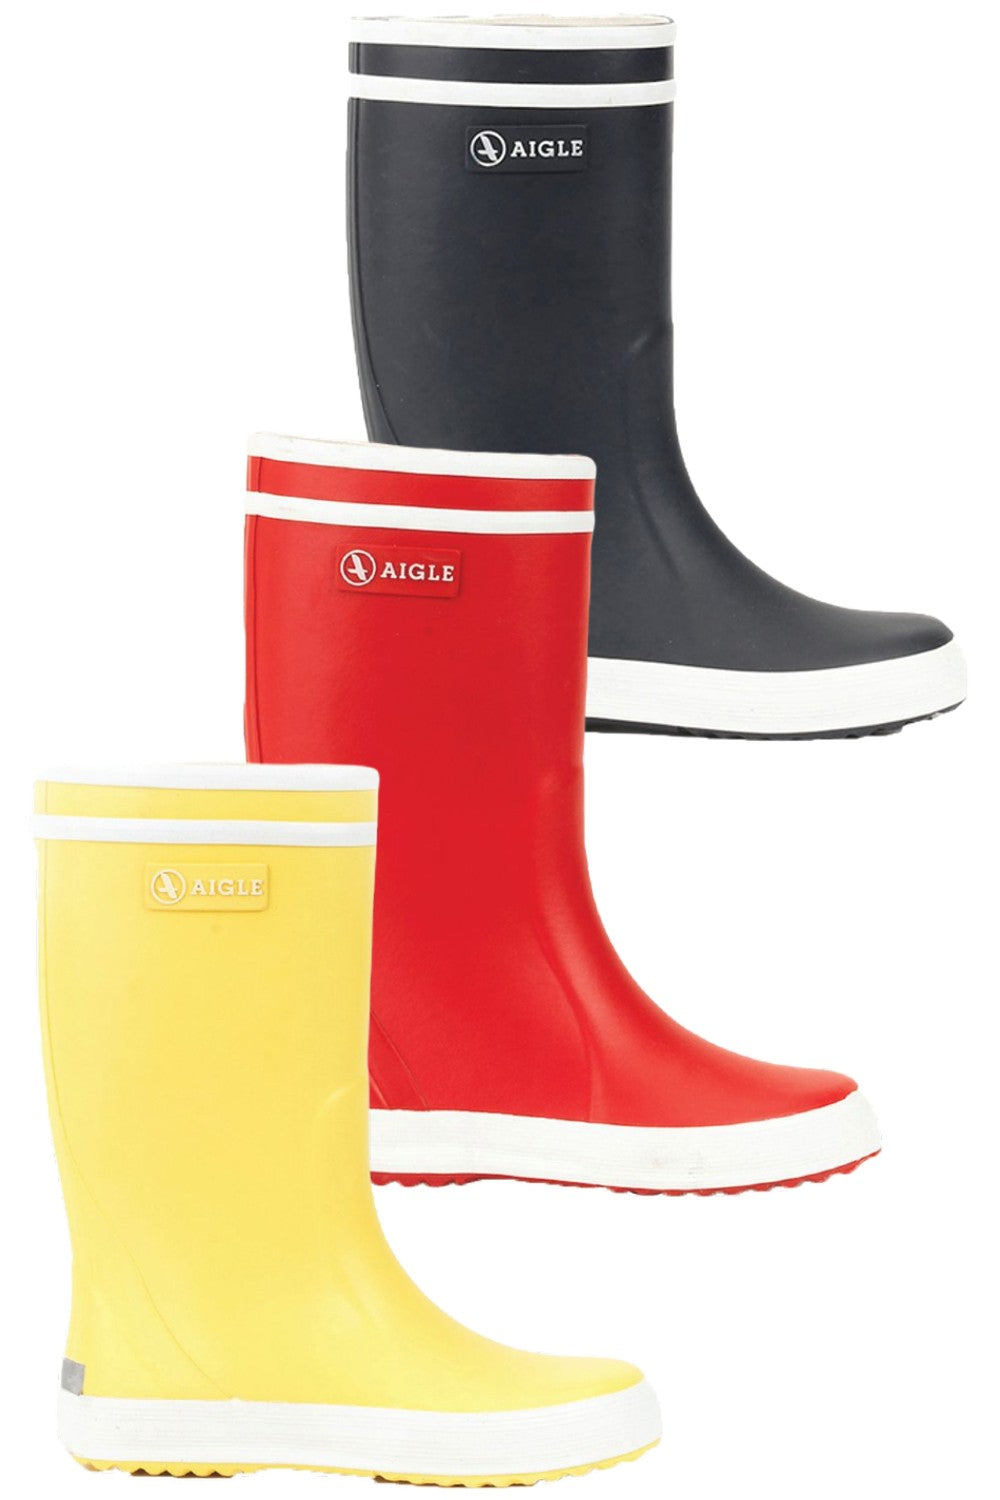 Aigle Lolly Pop Childrens Boot In Marine, Red and Yellow